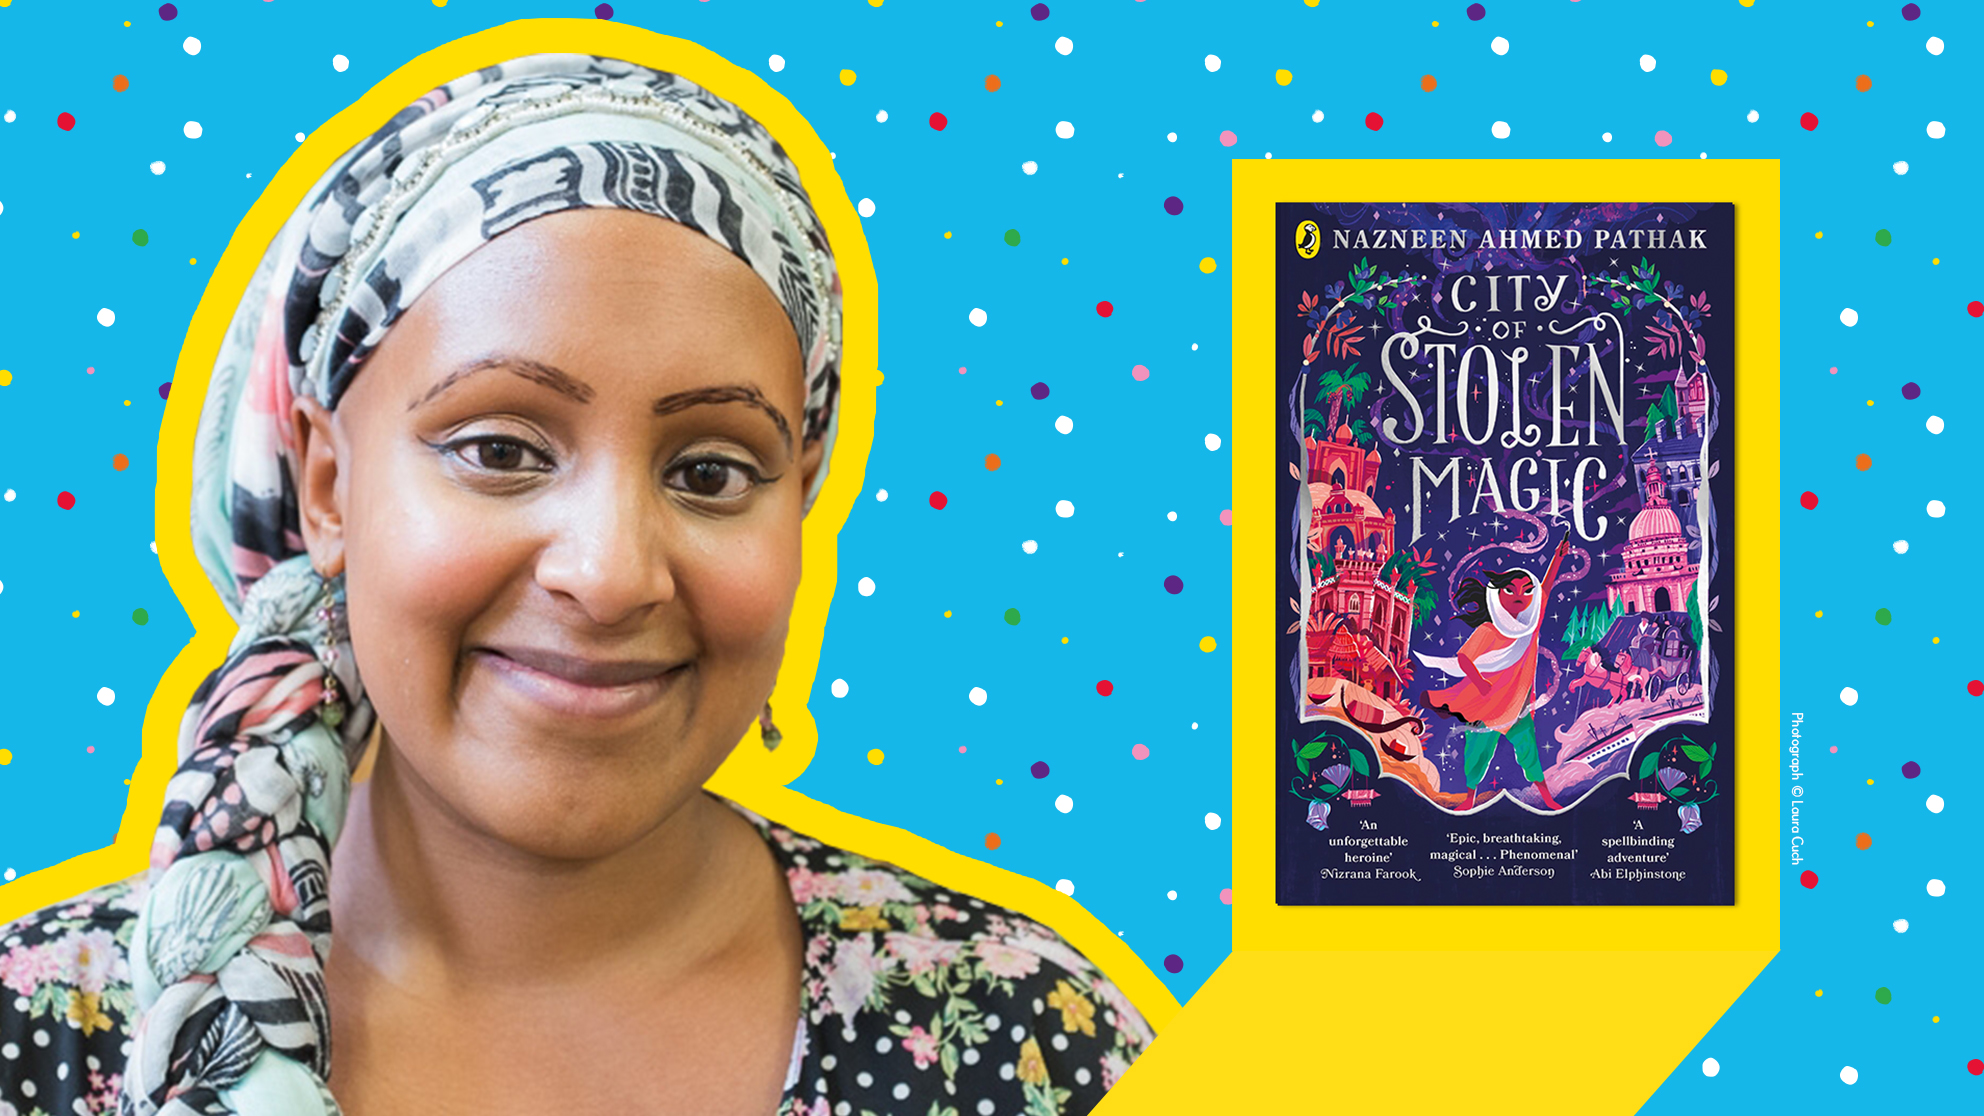 Extract: City of Stolen Magic by Nazneen Ahmed Pathak - Puffin Schools